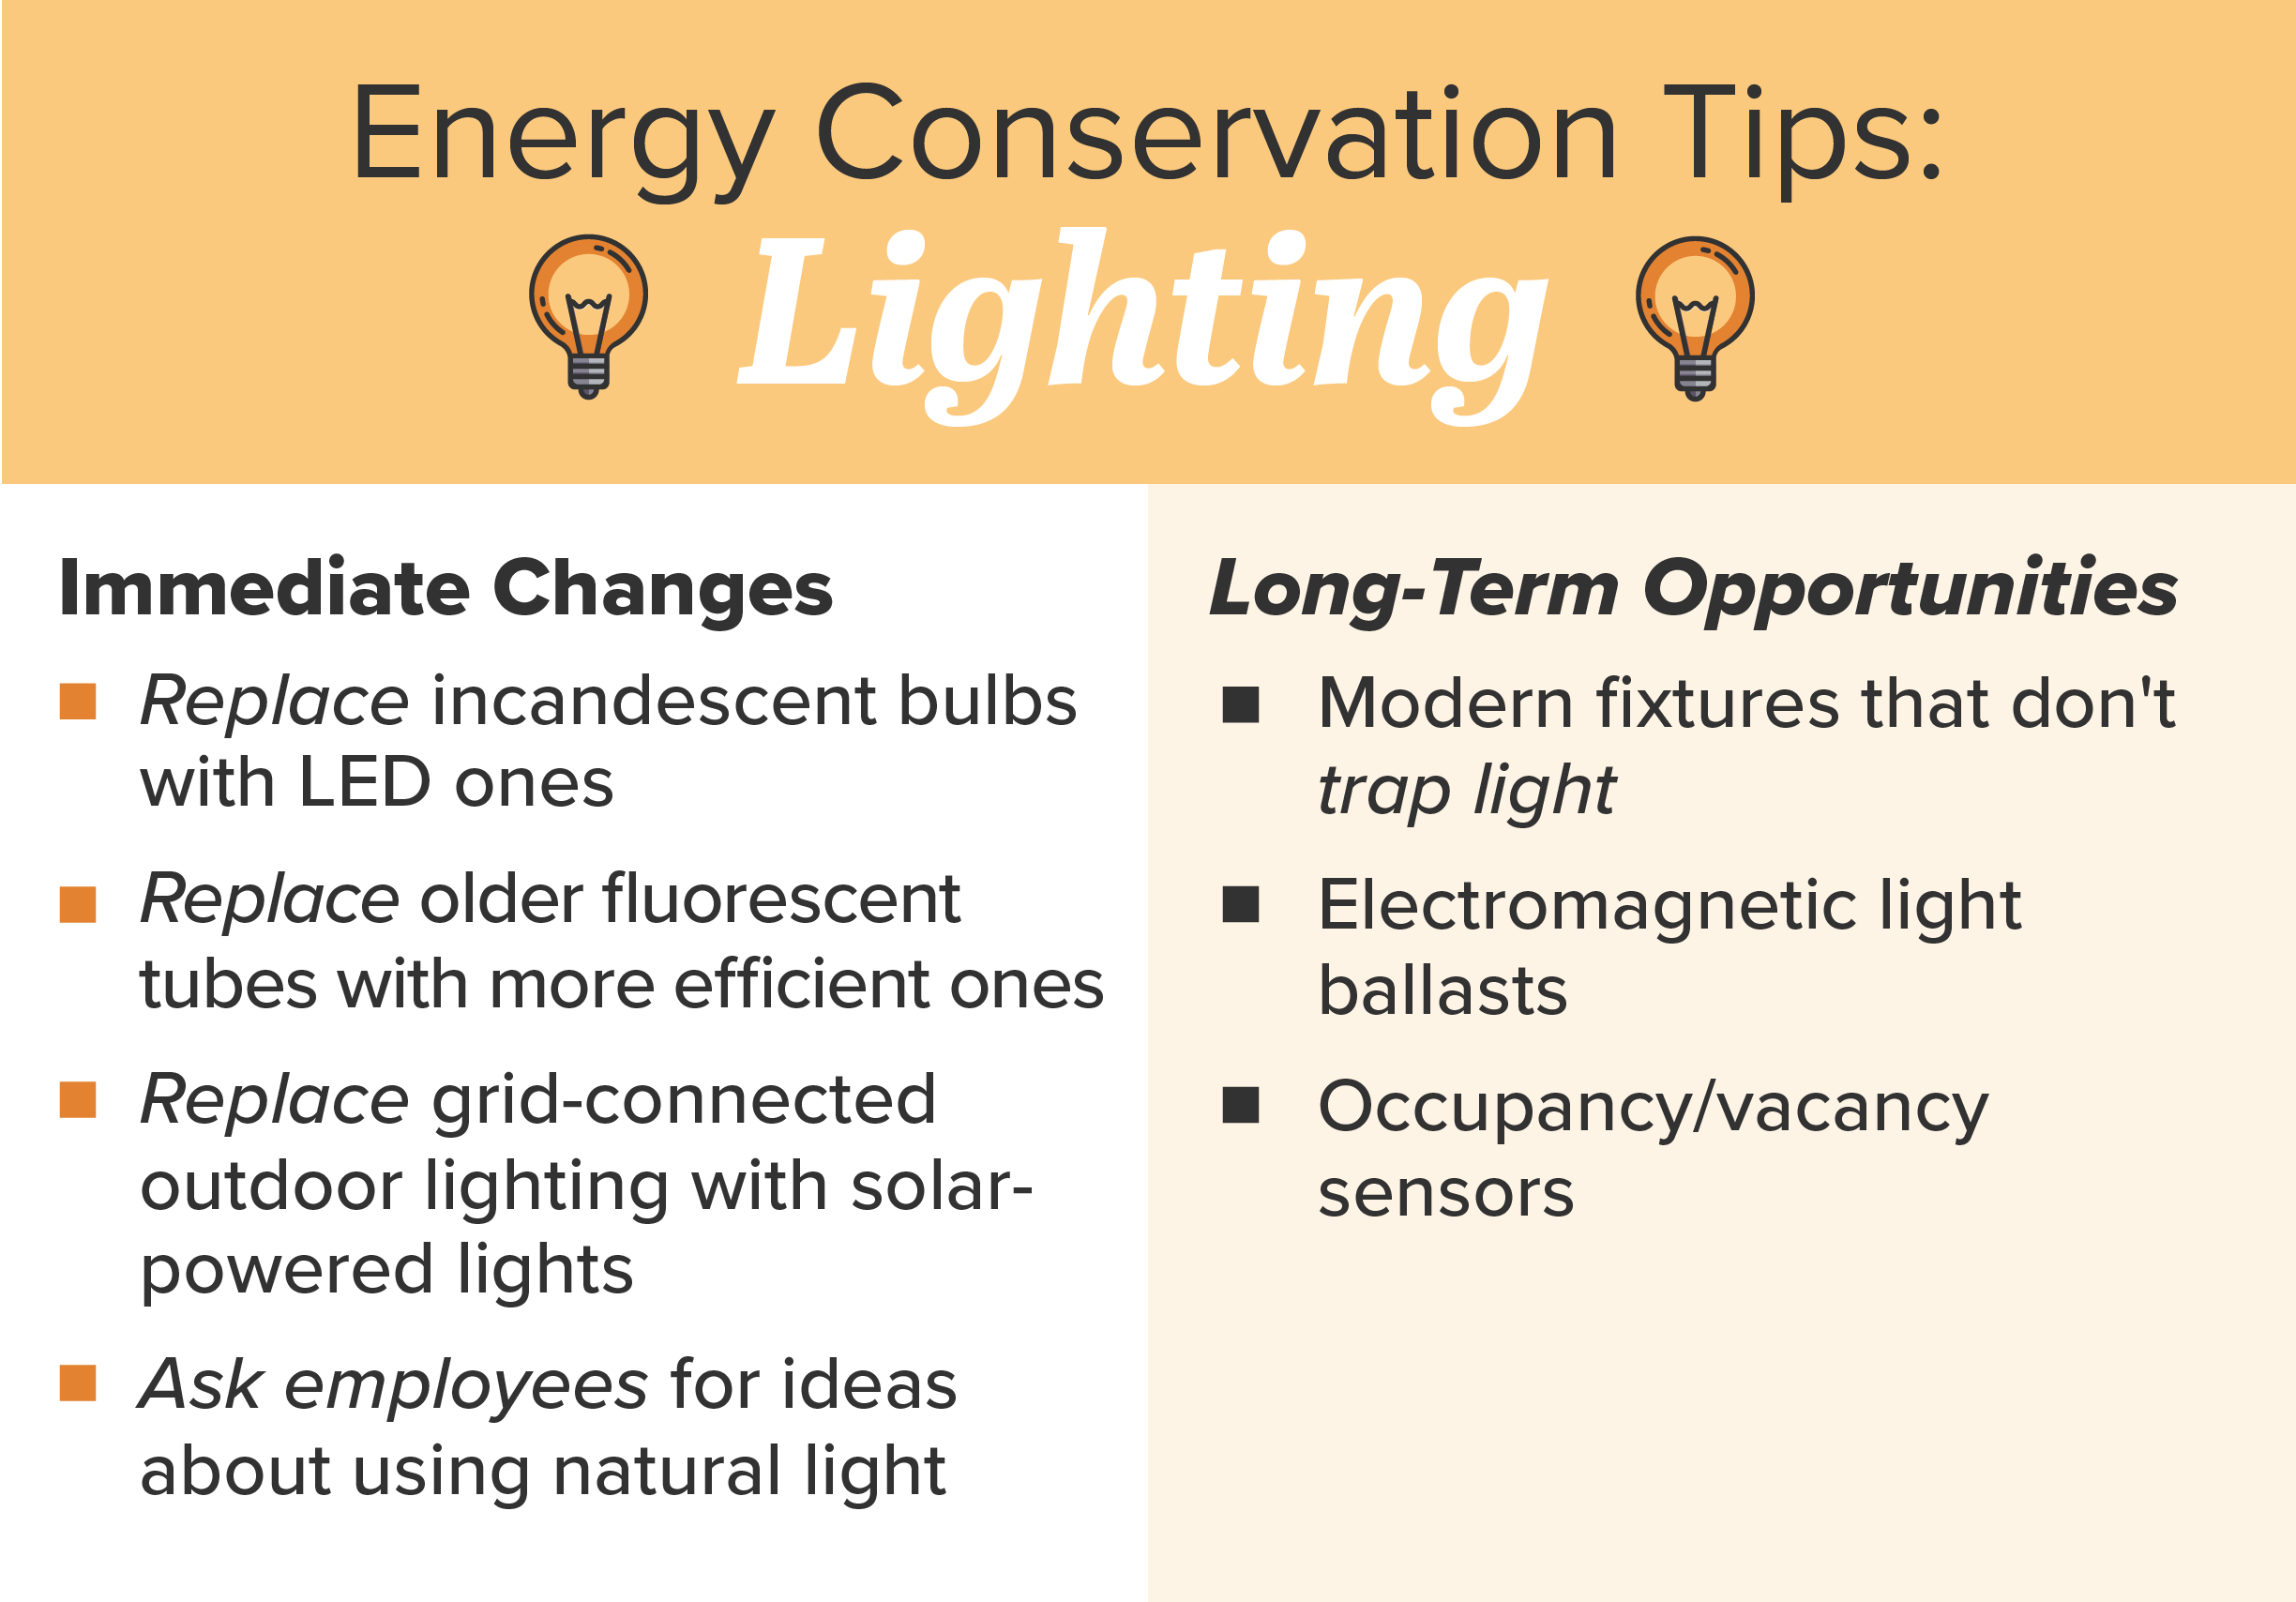 Lighting energy conservation tips